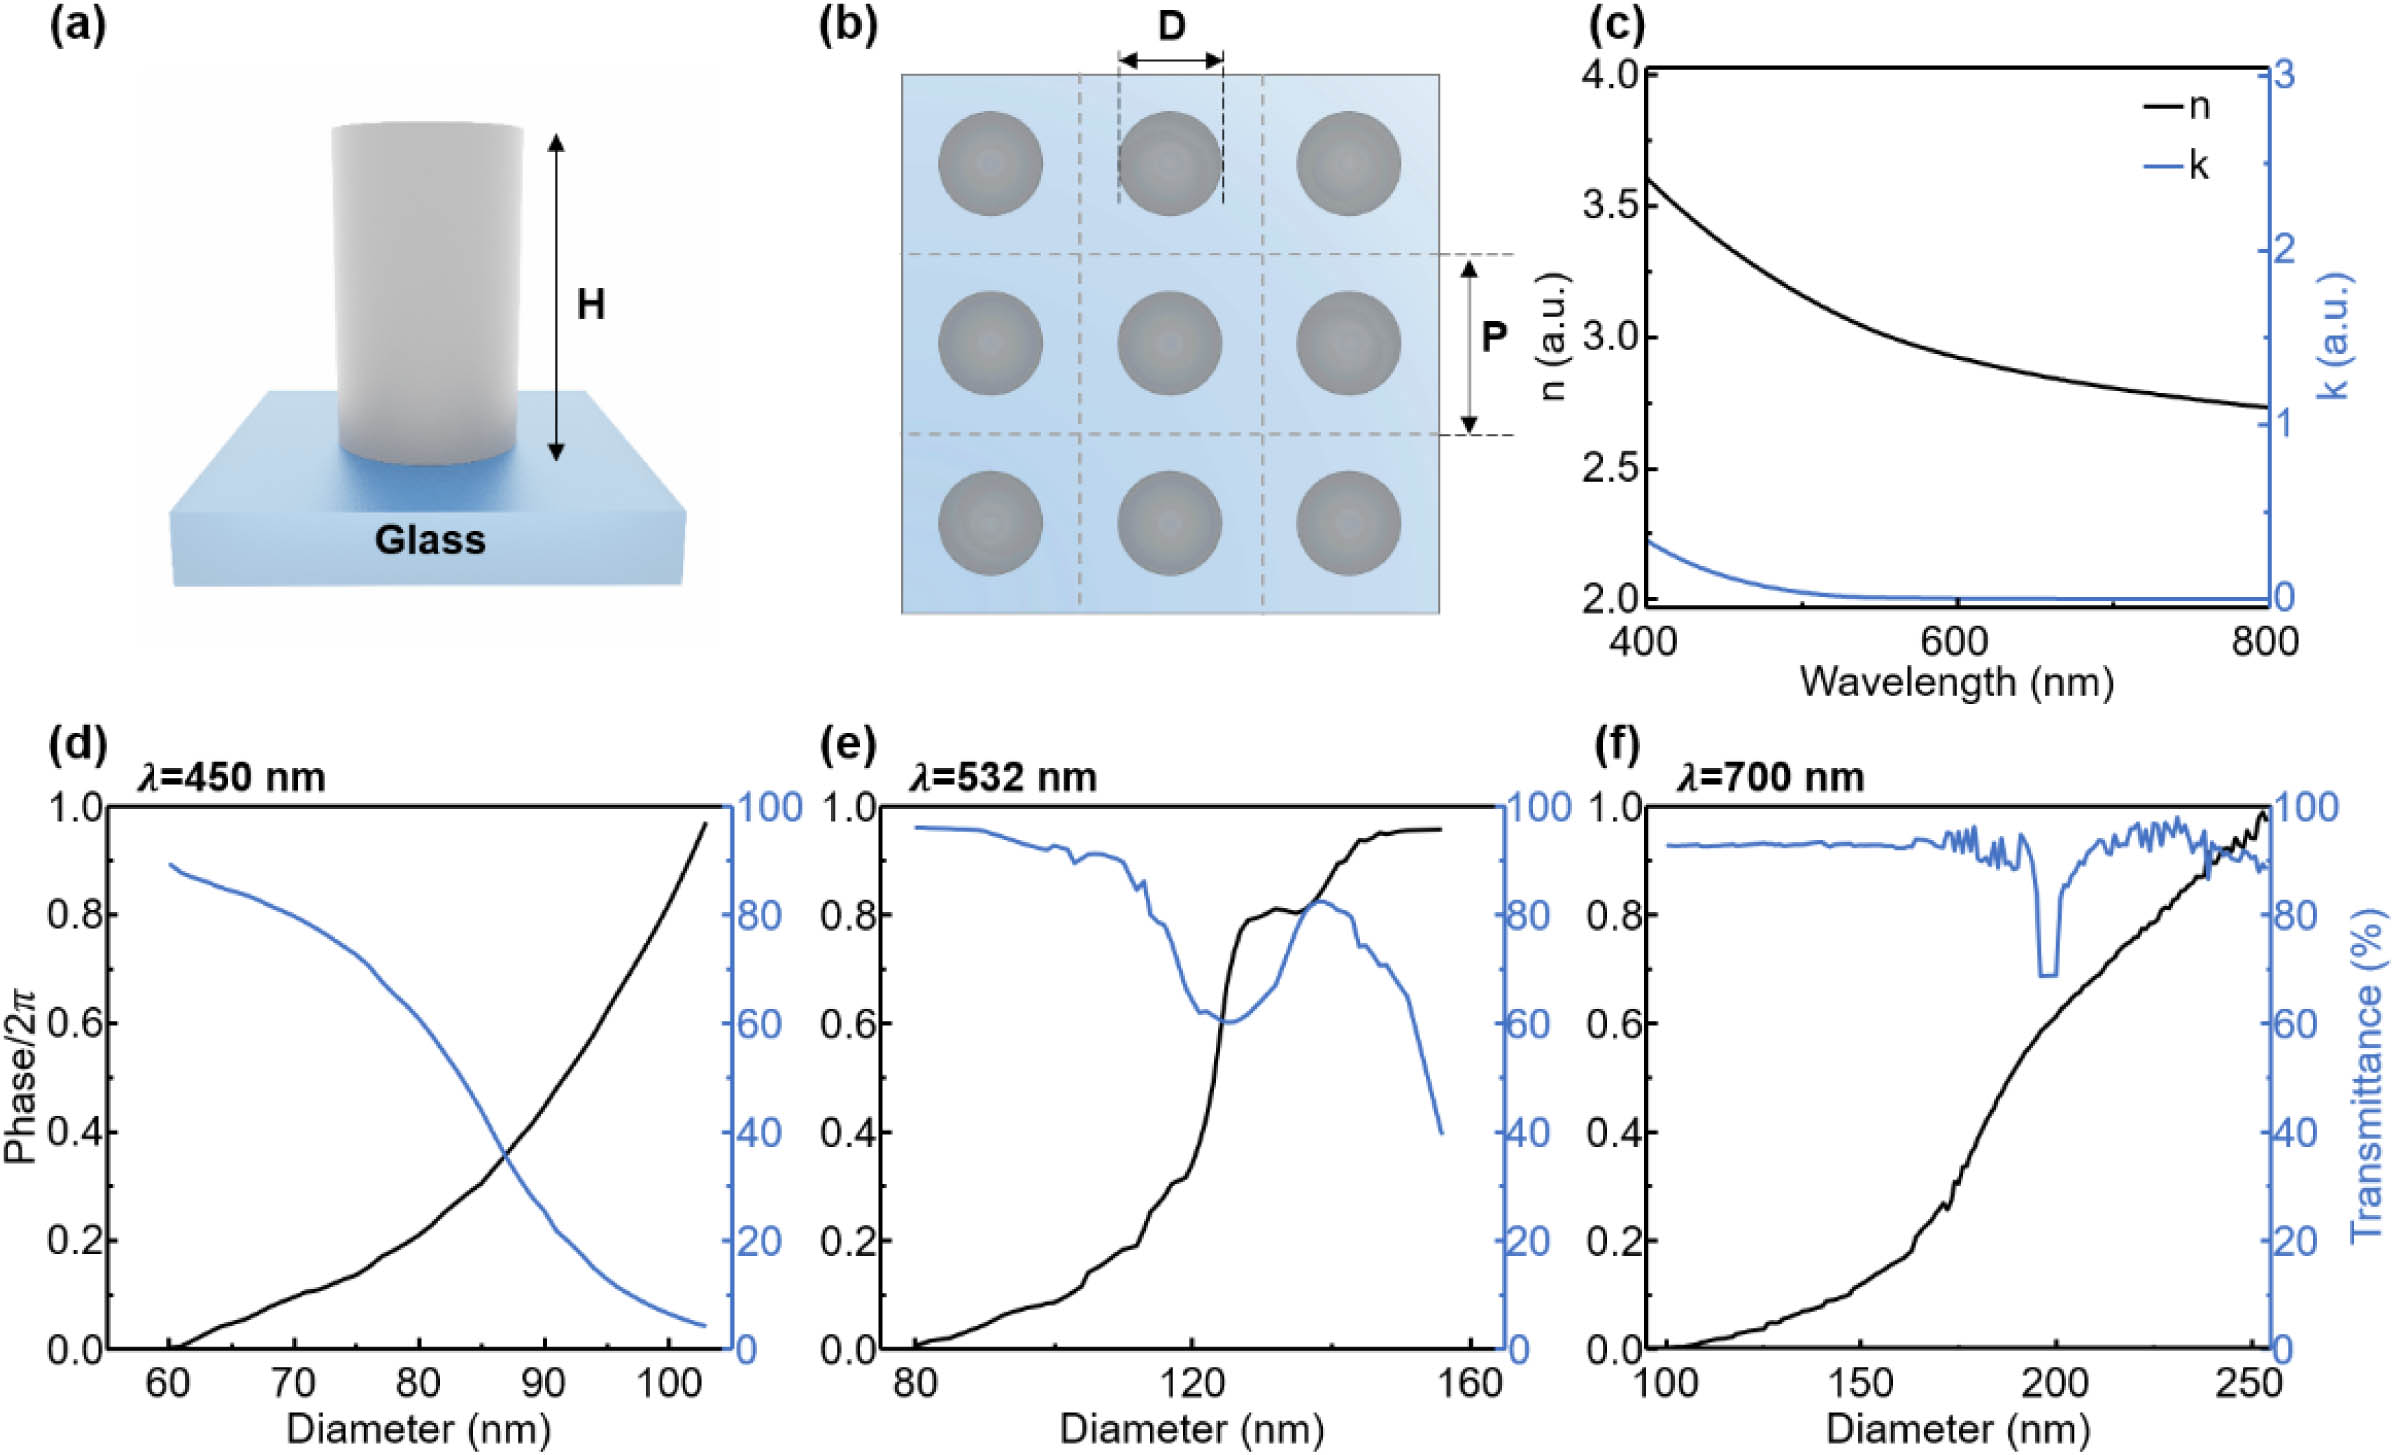 (a) Schematic image of a low-loss hydrogenated amorphous silicon (a-Si:H) meta-atom on a glass substrate. (b) Top view of metalens building blocks with a rectangular array. (c) Measured refractive index n and extinction coefficient k of low-loss a-Si:H. (d)–(f) Simulated phase and transmittance for meta-atoms as a function of diameter (D) at λ of (d)450, (e) 532, and (f) 700 nm. Height(H)=600 nm; period (P)=230 nm for λ=450 nm; P=460 nm for λ=532 and 700 nm.